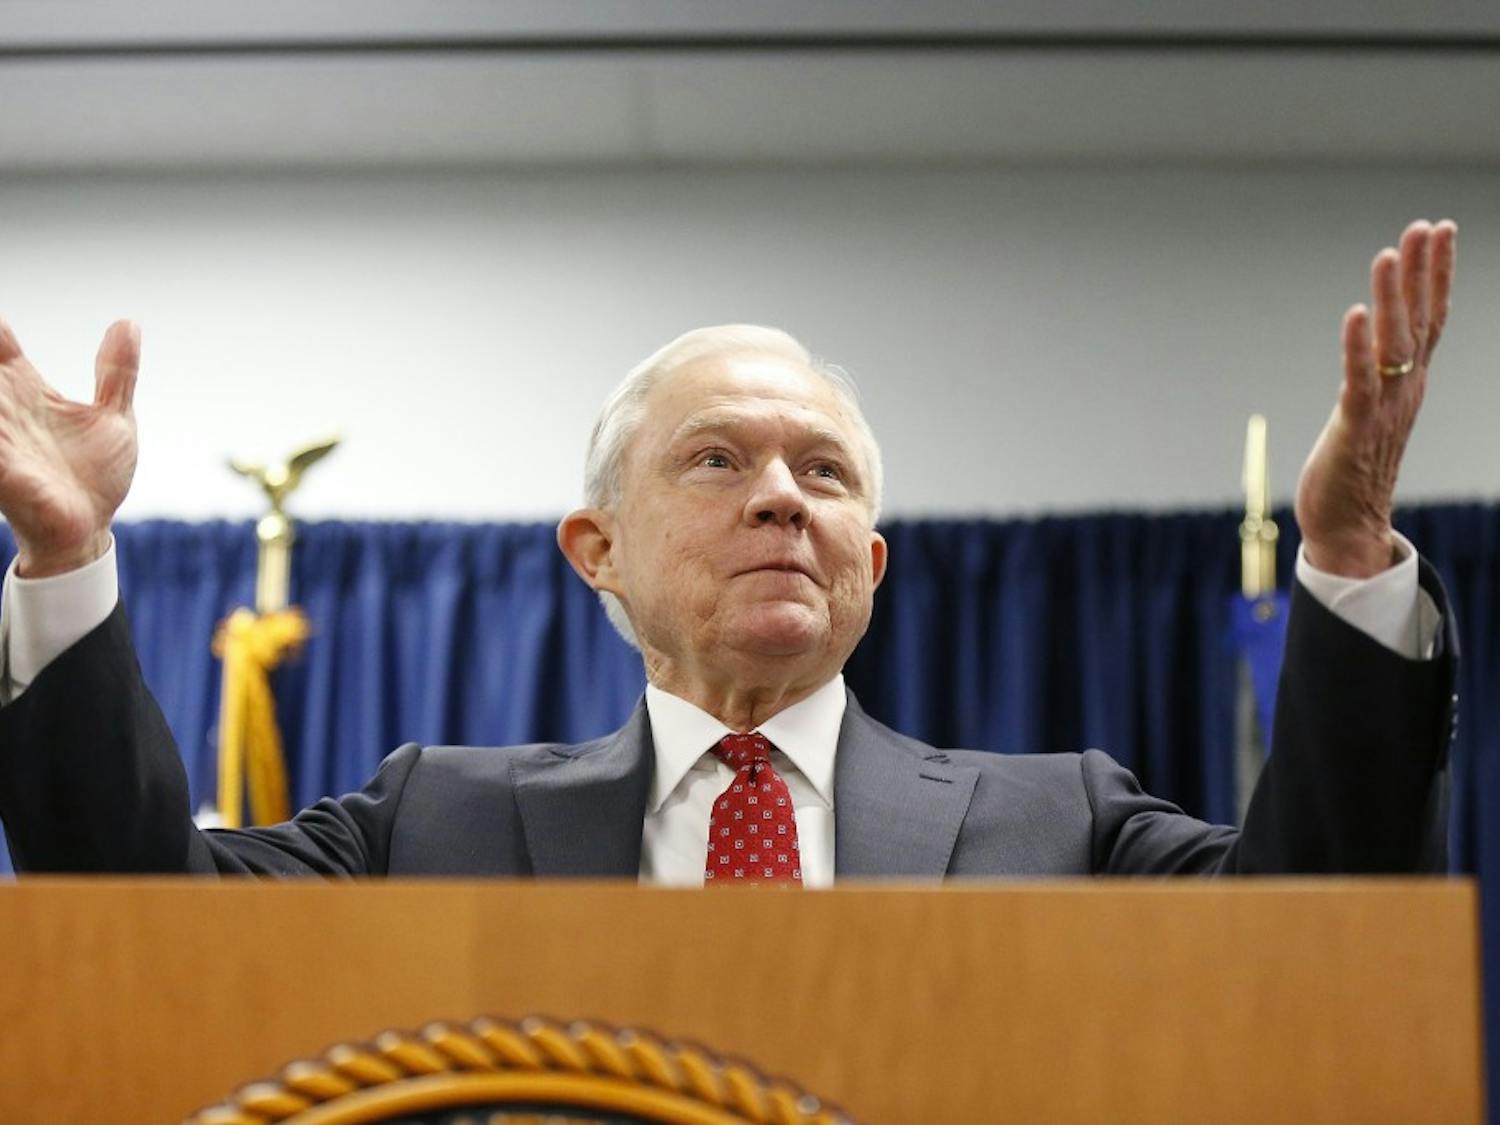 Jeff Sessions blasts sanctuary cities in Philadelphia appearance